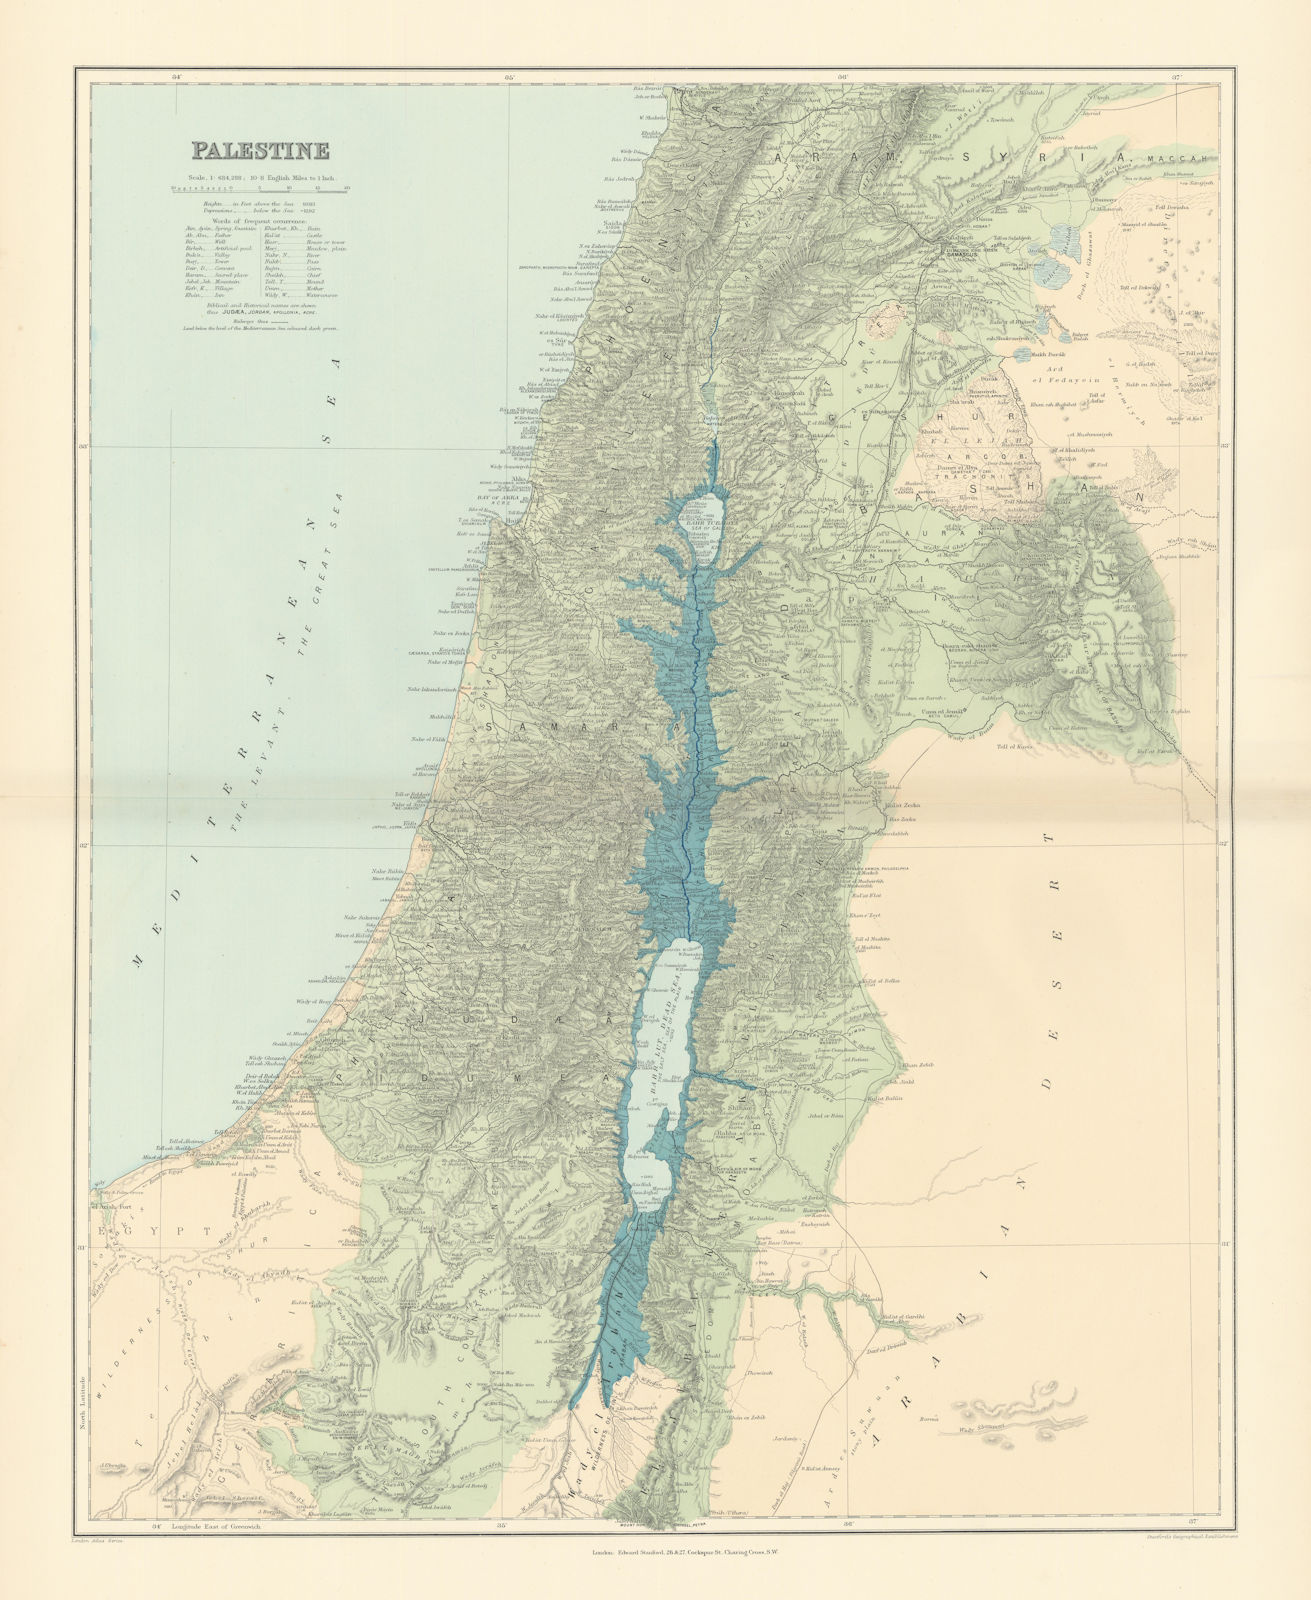 Associate Product Palestine Holy Land Israel. Biblical & historical names. STANFORD 1896 old map